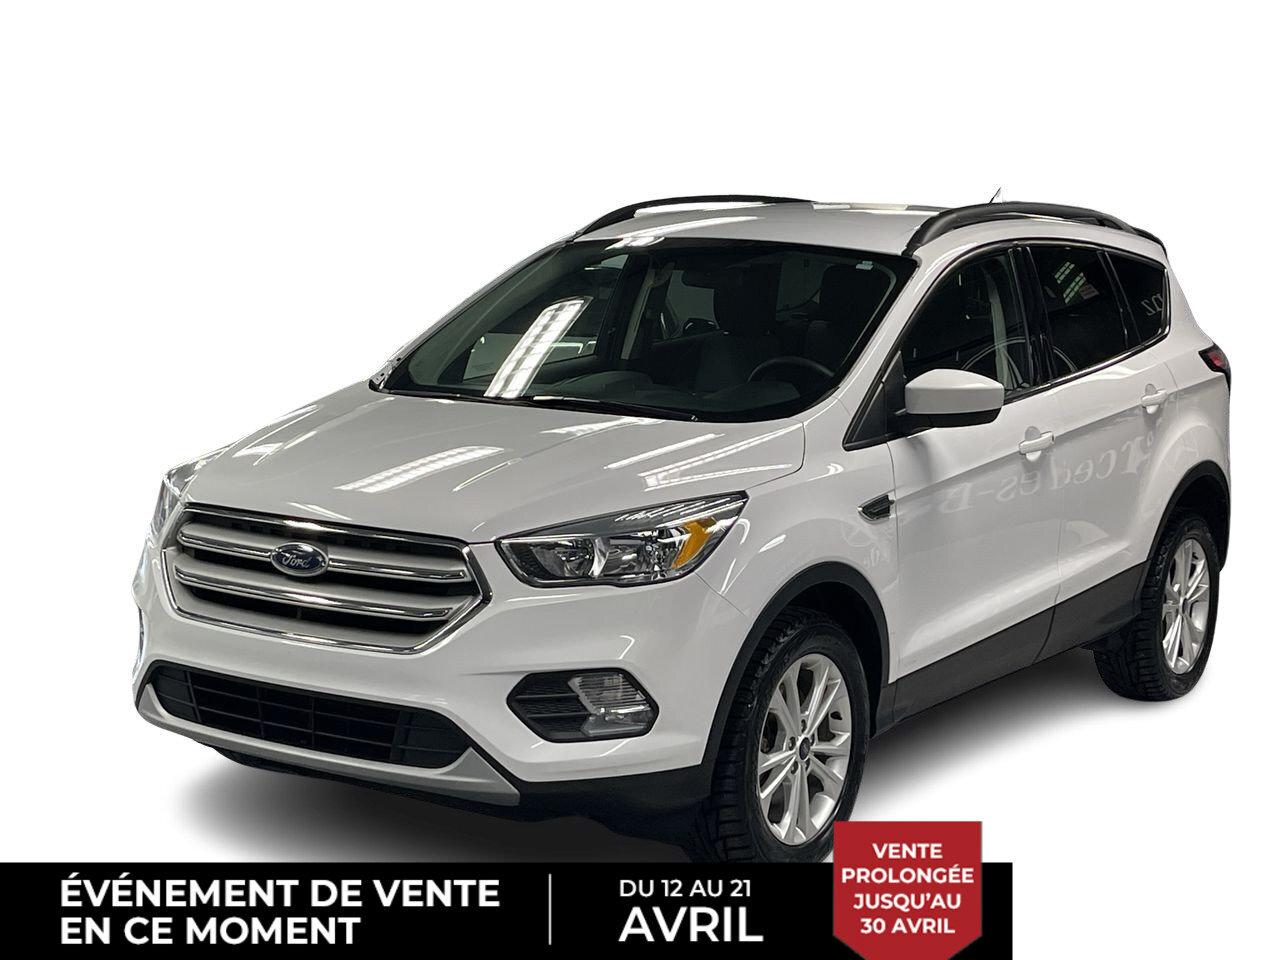 2018 Ford Escape SE - 4WD * AWD * Caméra de recul Must see ! SE AWD